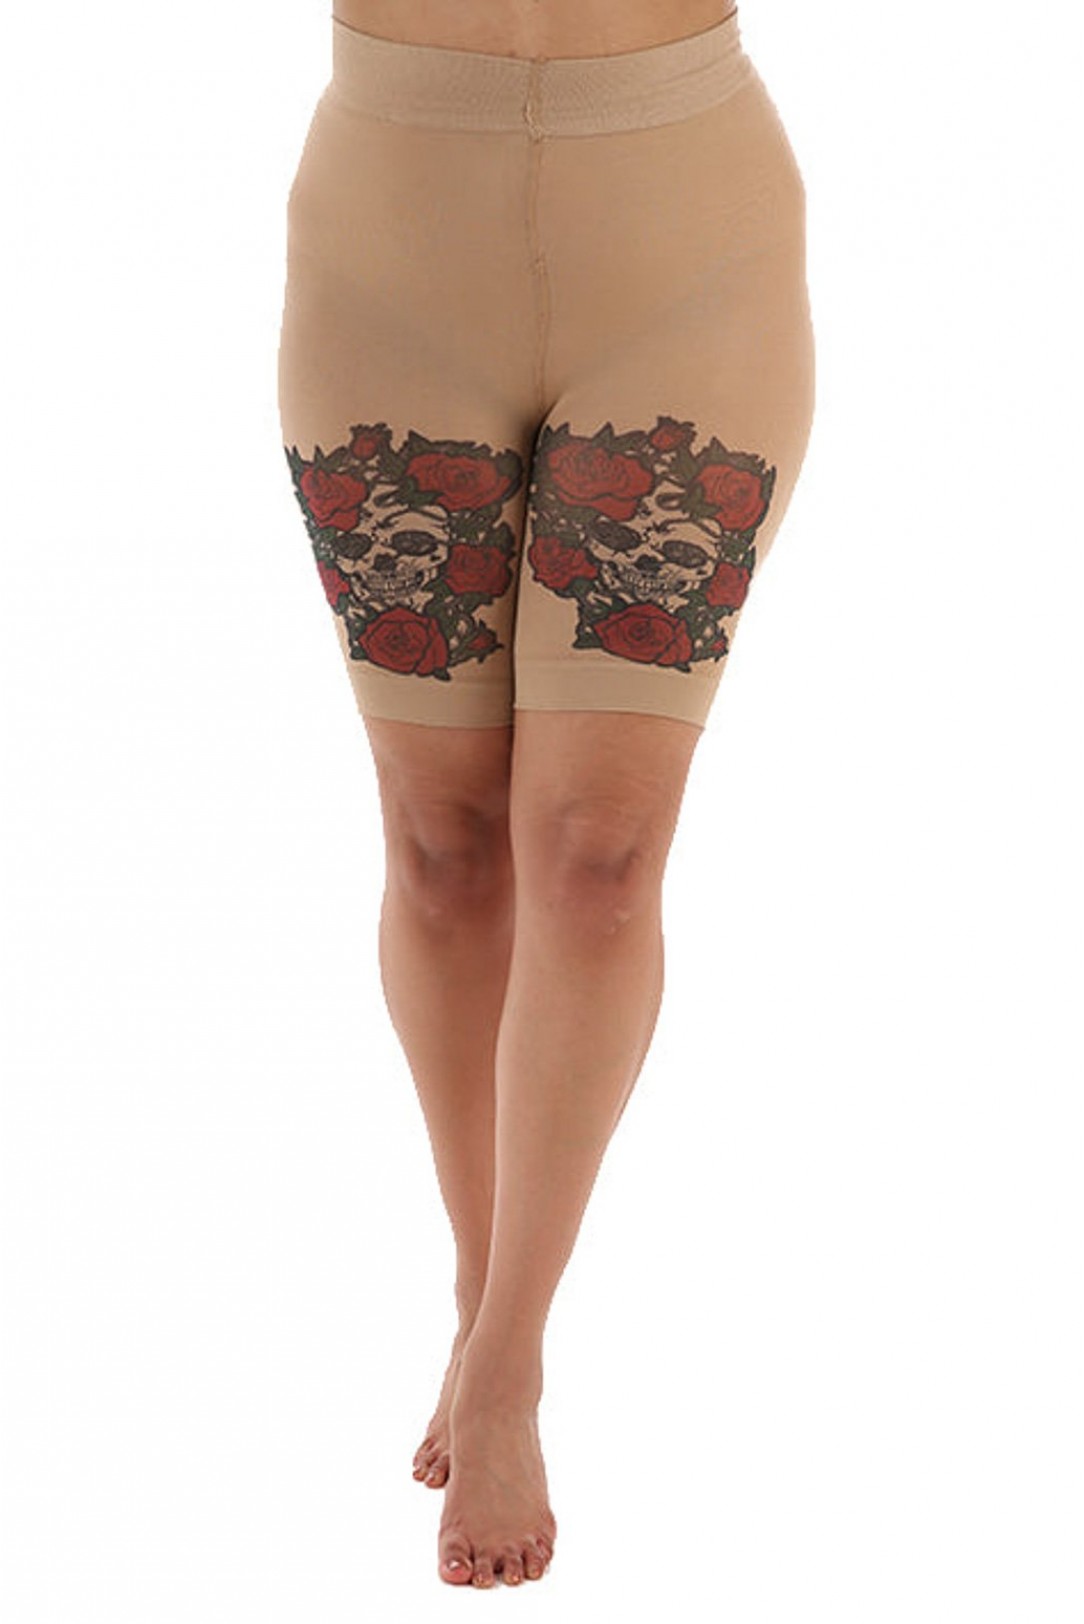 Beige super stretch anti-chafing thigh high leggings with rose